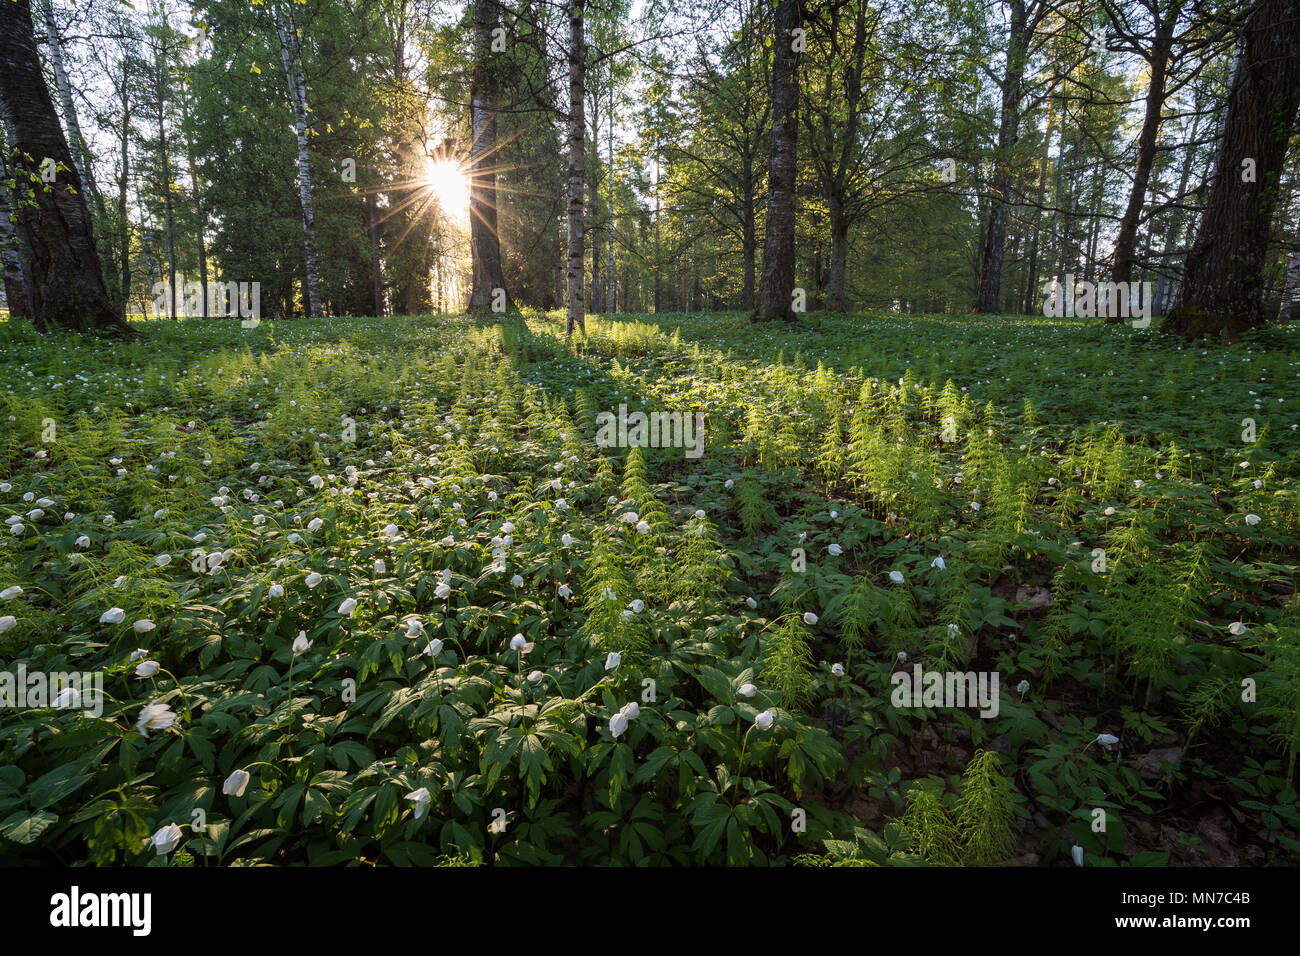 A lot of Wood anemore flowers and wood horsetail plants at the lush Piikahaka greenspace and meadow in Tampere, Finland, at sunrise in the summertime. Stock Photo